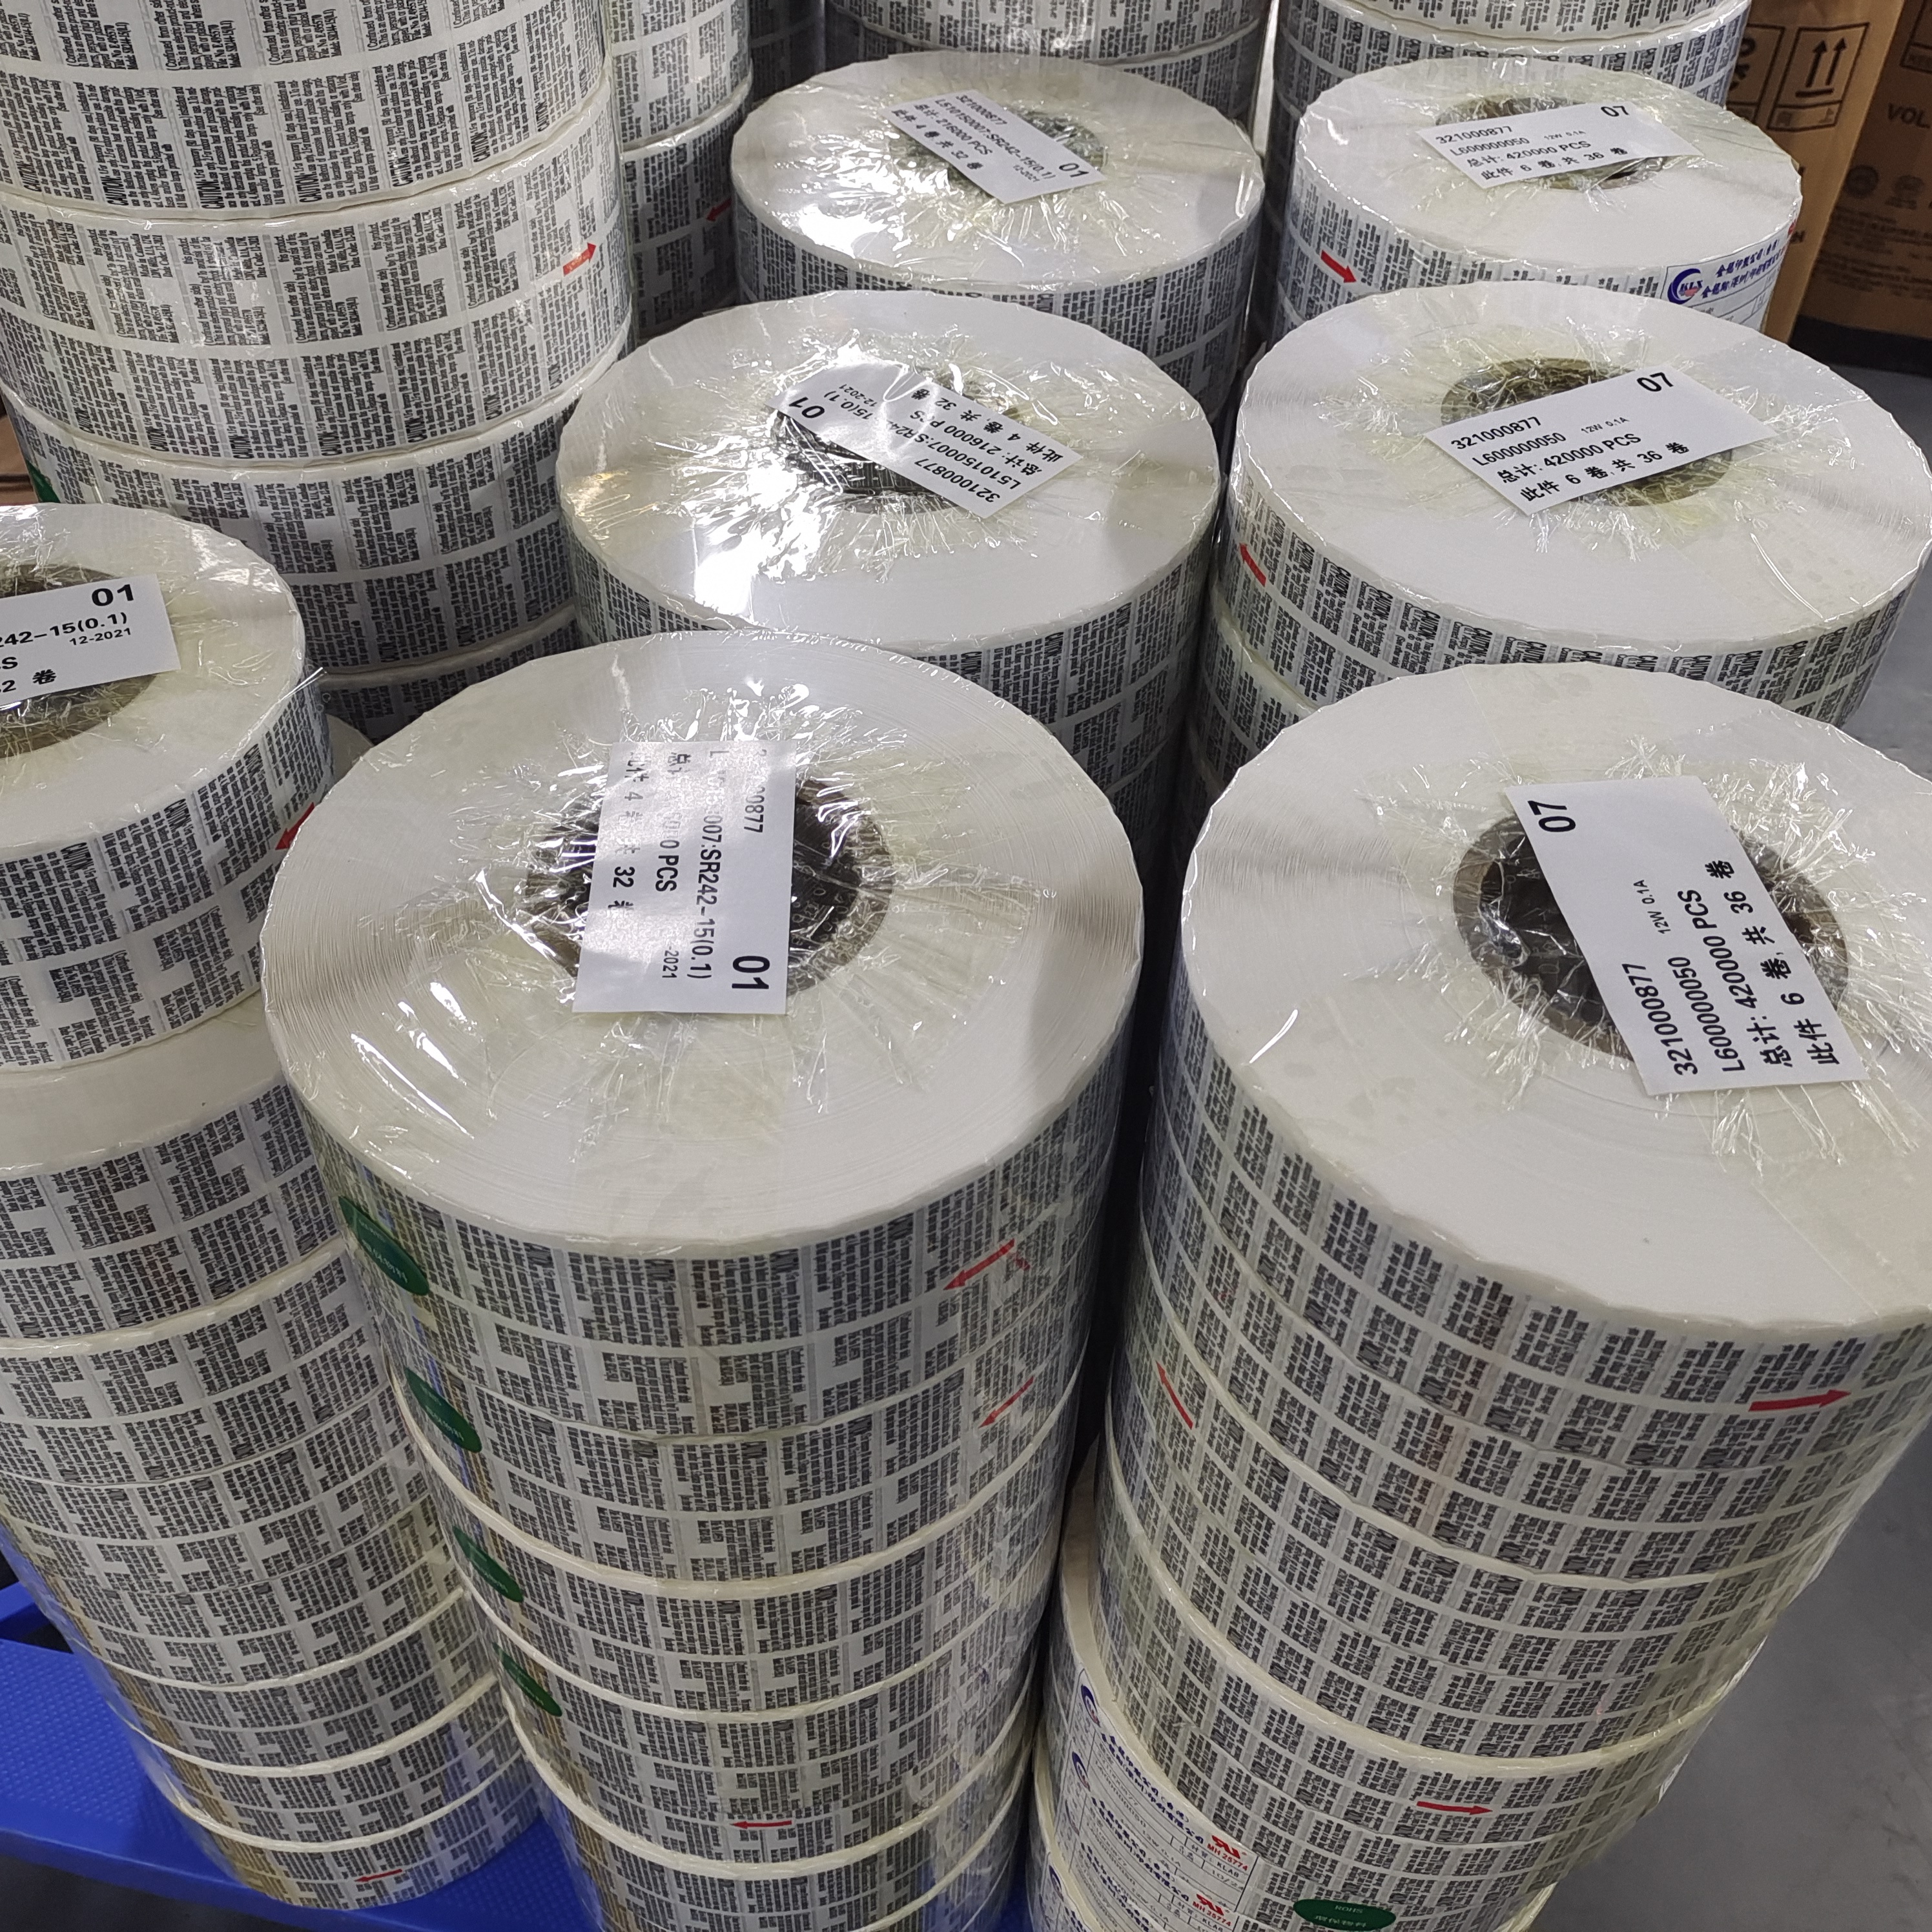 KLX printing company is delivering 3 millions of UL labels to Cambodia